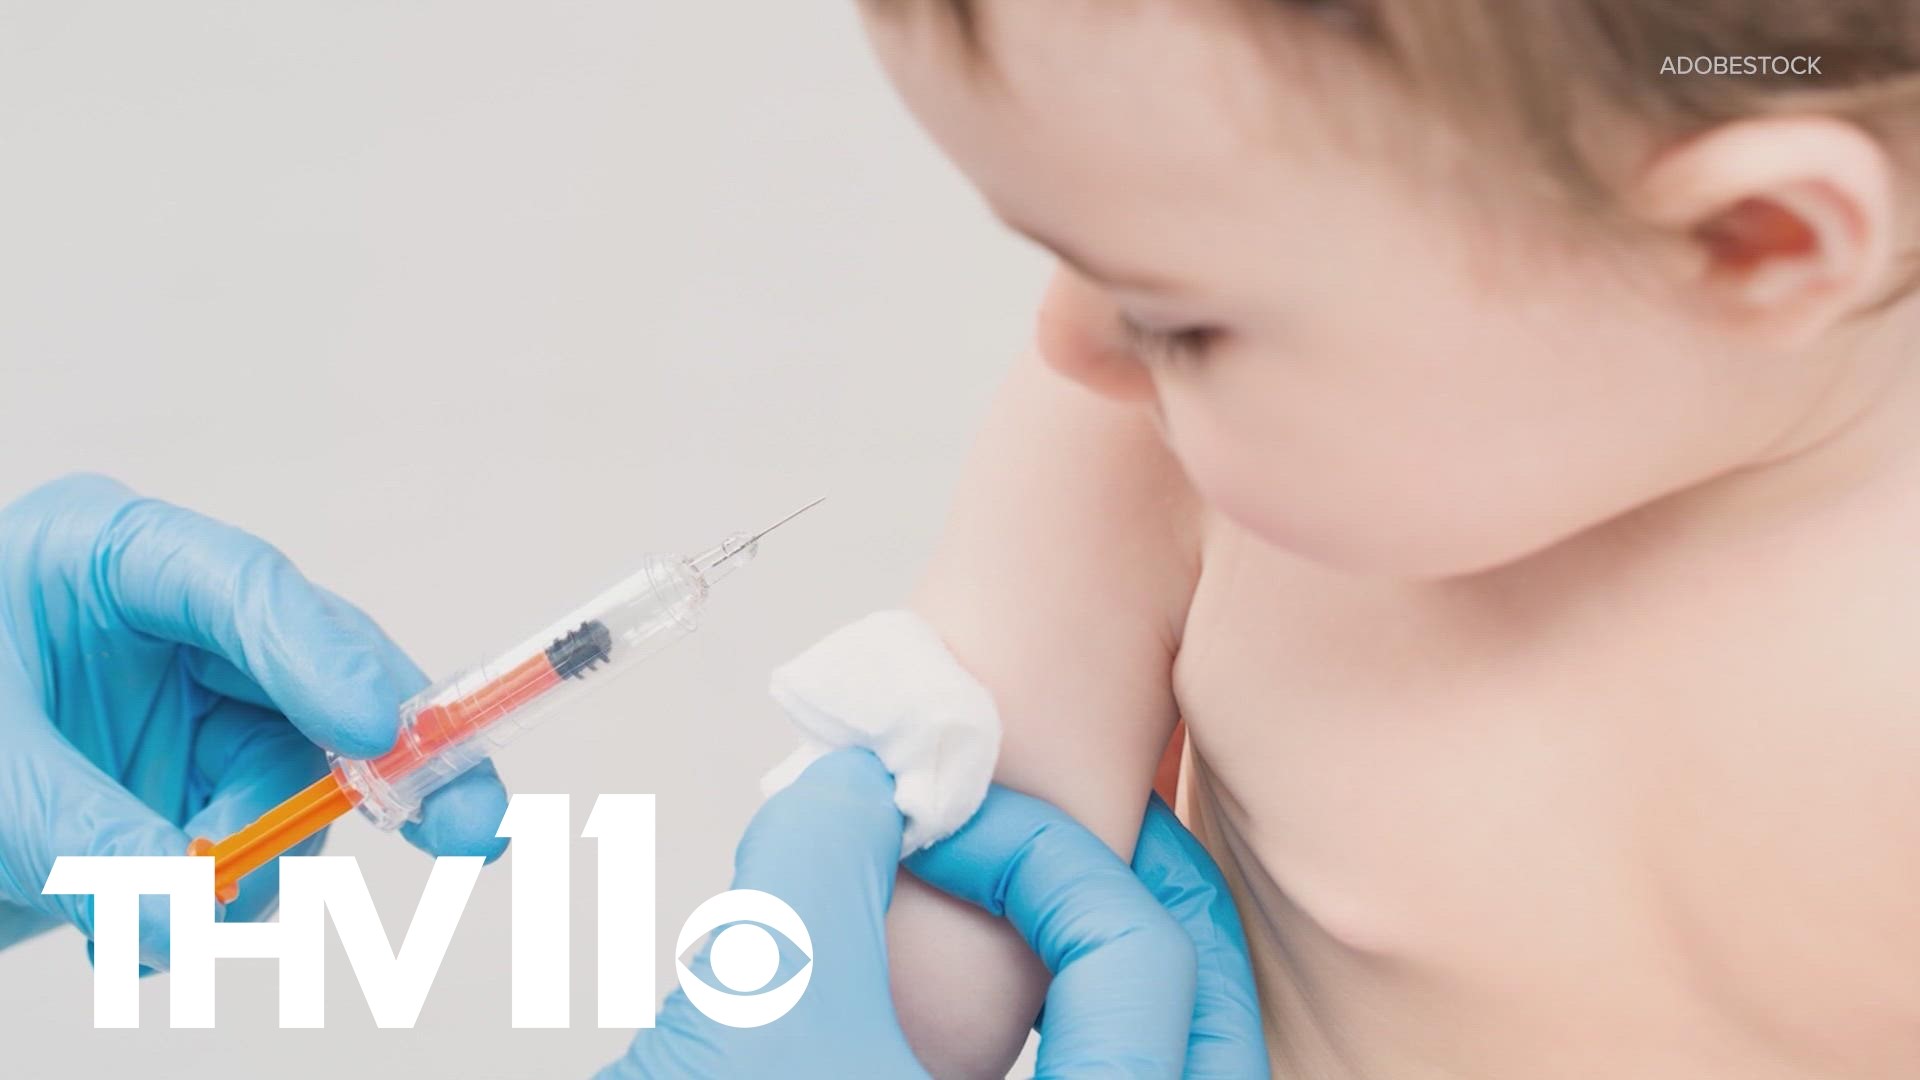 The CDC now recommends COVID-19 vaccines for everyone - including infants as young as 6 months old. And now Arkansas health officials have echoed the same advice.